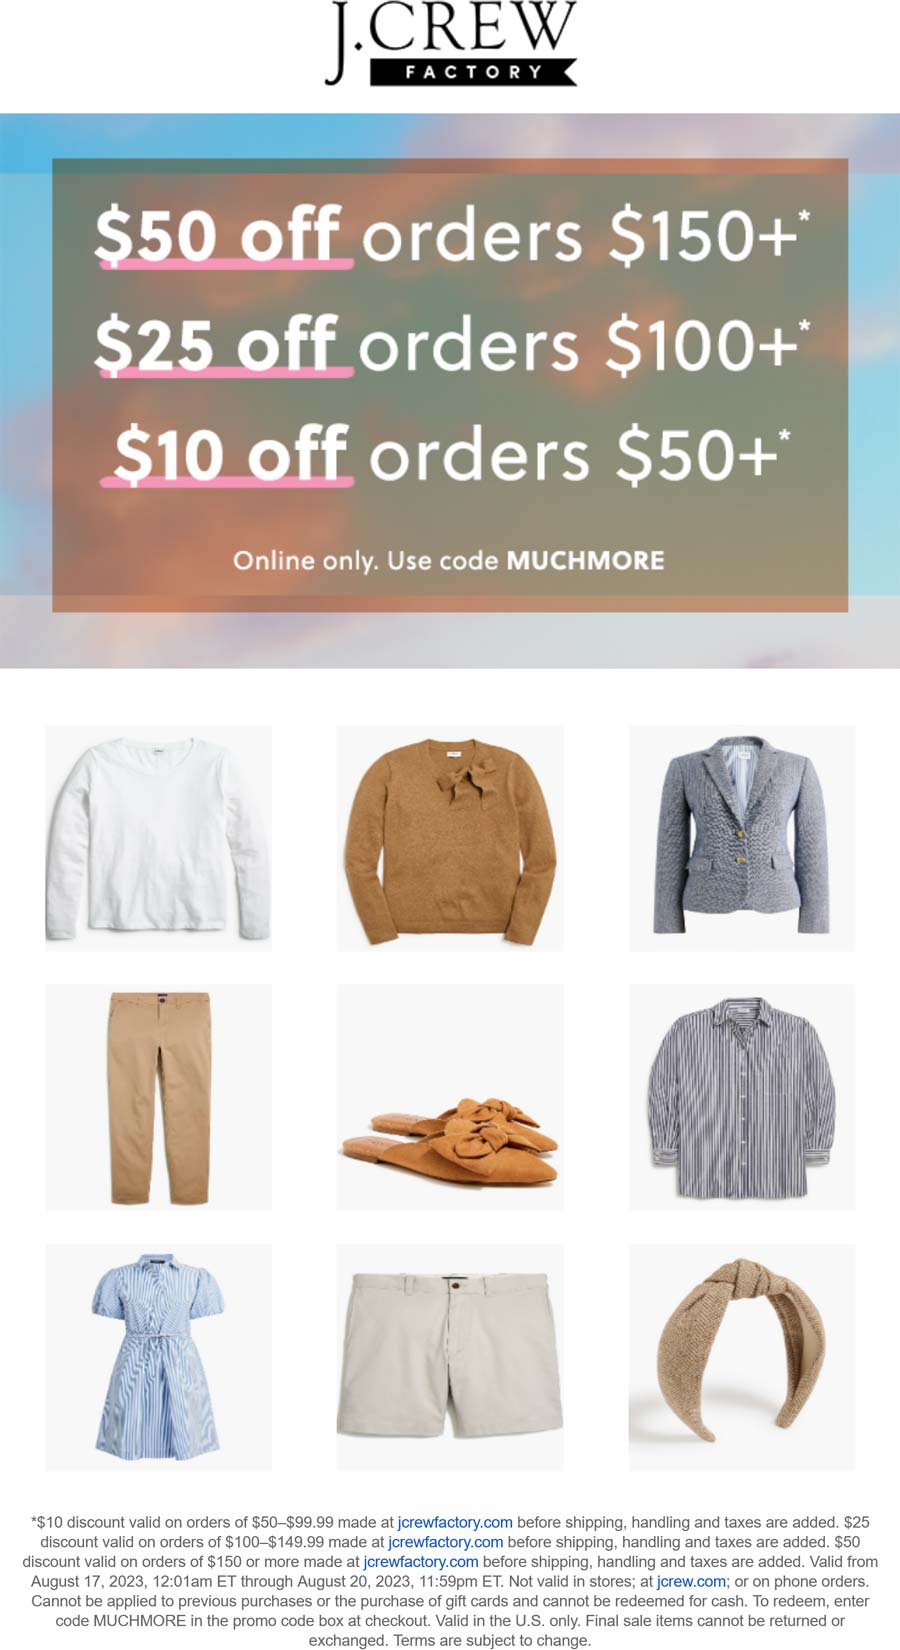 J.Crew Factory stores Coupon  $10-$50 off $50+ online today at J.Crew Factory via promo code MUCHMORE #jcrewfactory 